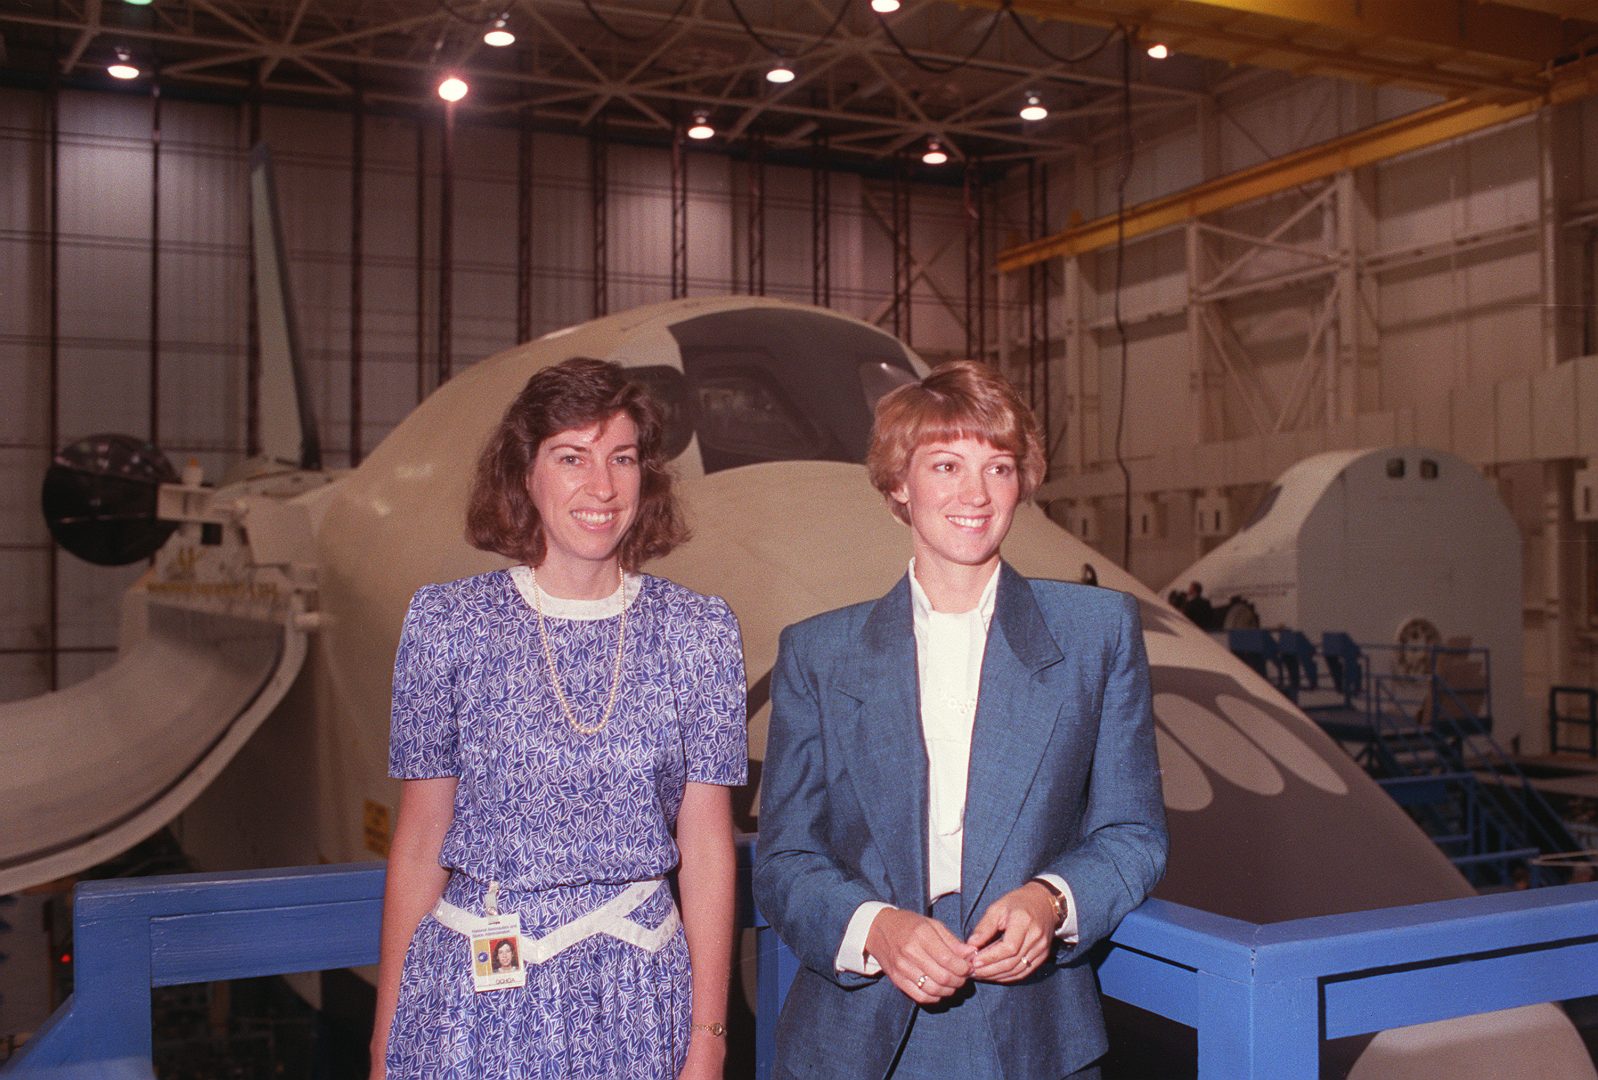 Dr. Ellen Ochoa, left, the first Hispanic woman astronaut, and Major Eileen M. Collins, right, the first woman to be named as a pilot candidate, begin their first day of candidate training at NASA in Houston, Texas, Monday, July 16, 1990.